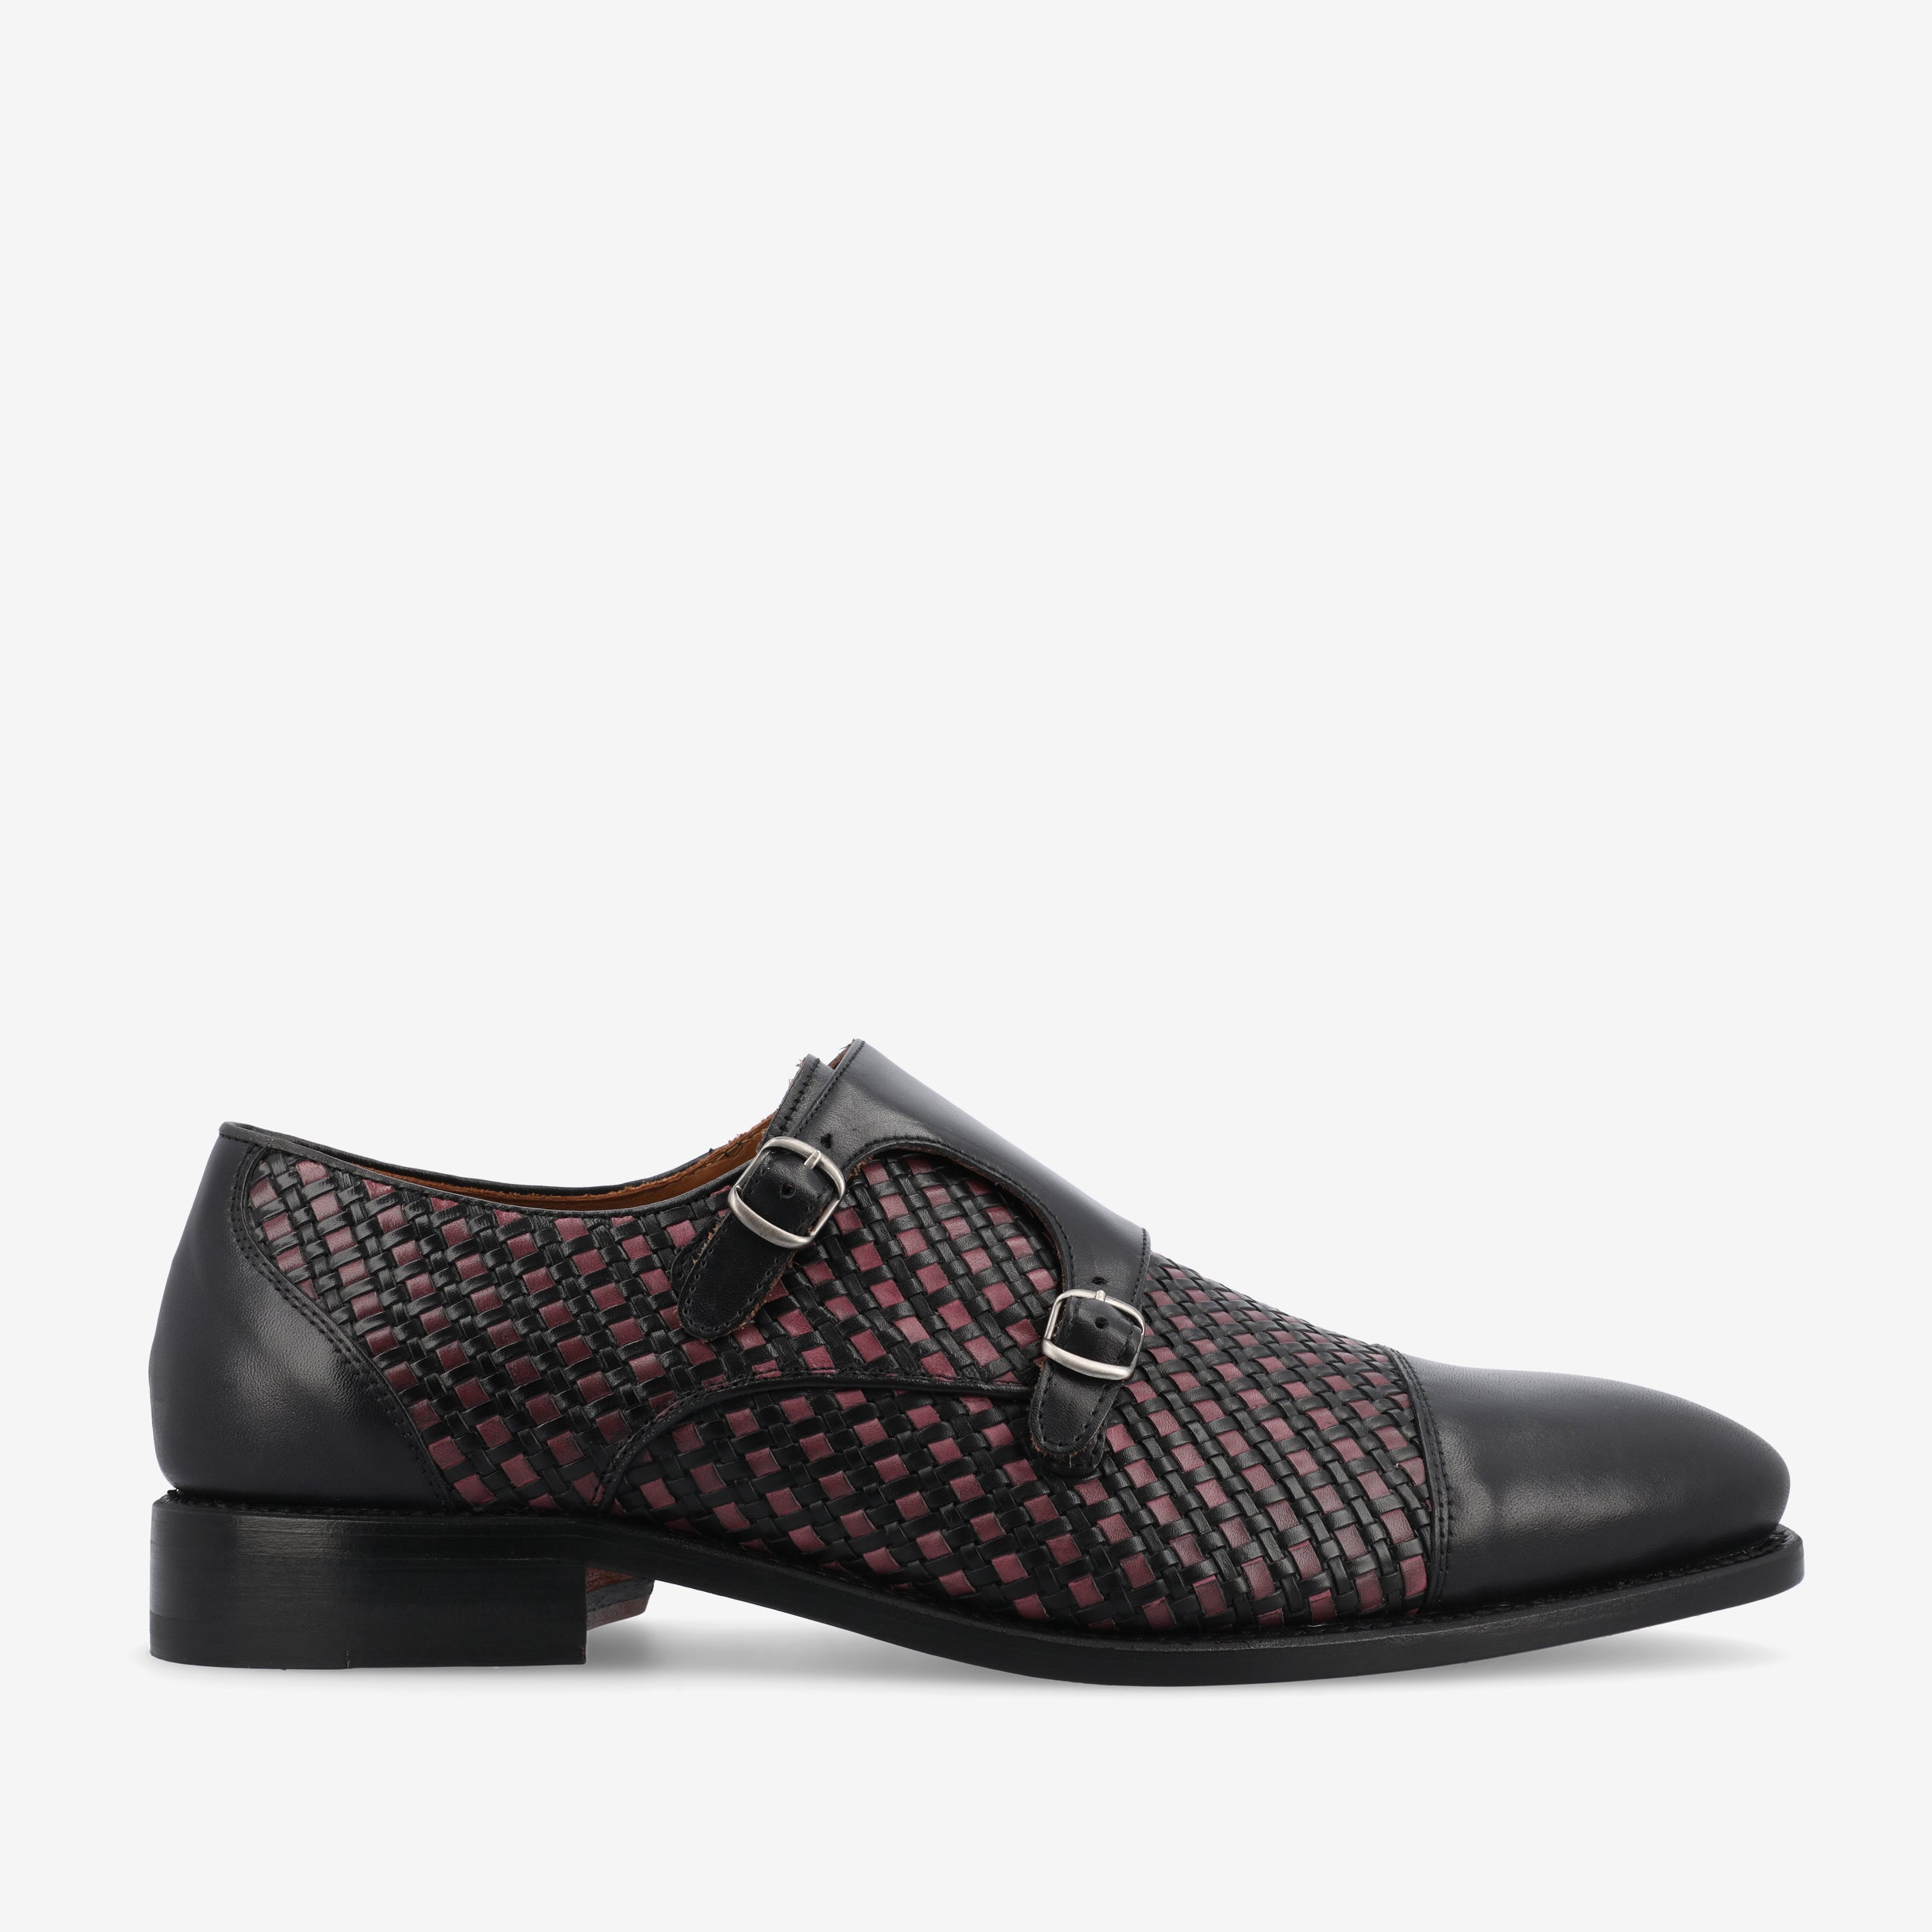 The Lucca Monk Woven in Black (Last Chance, Final Sale)